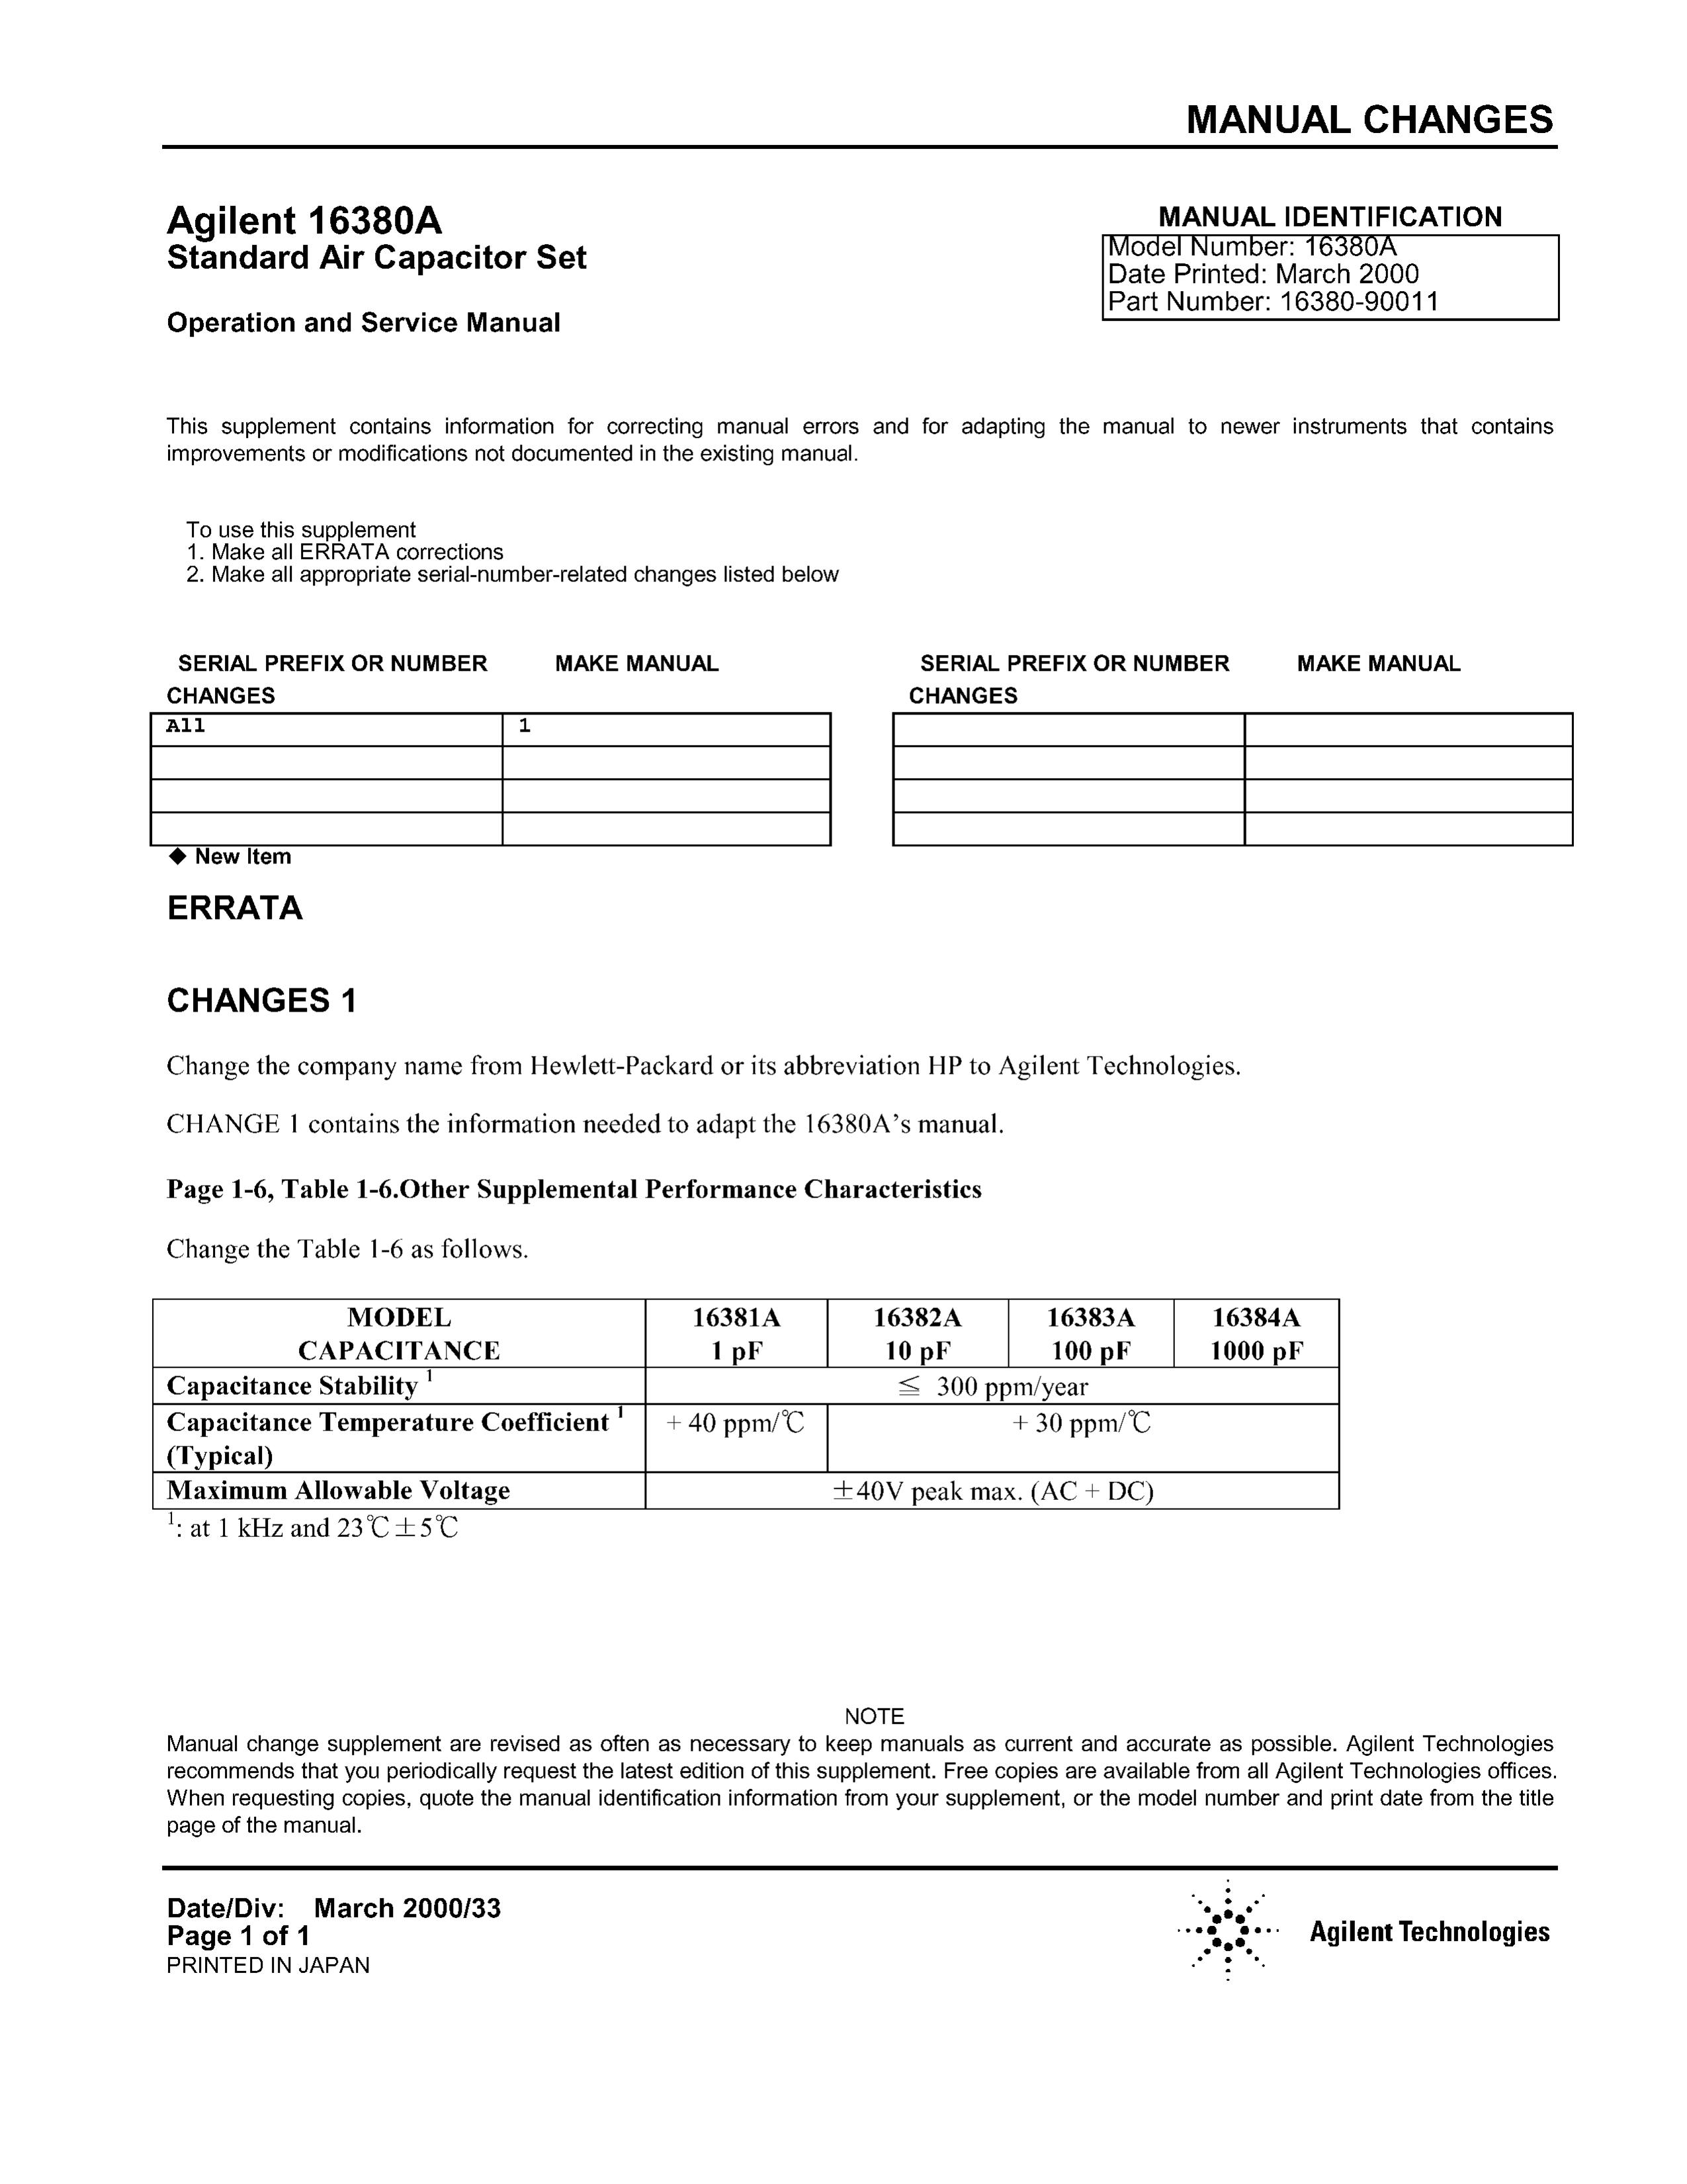 Agilent Technologies 16380A Washer/Dryer User Manual (Page 1)